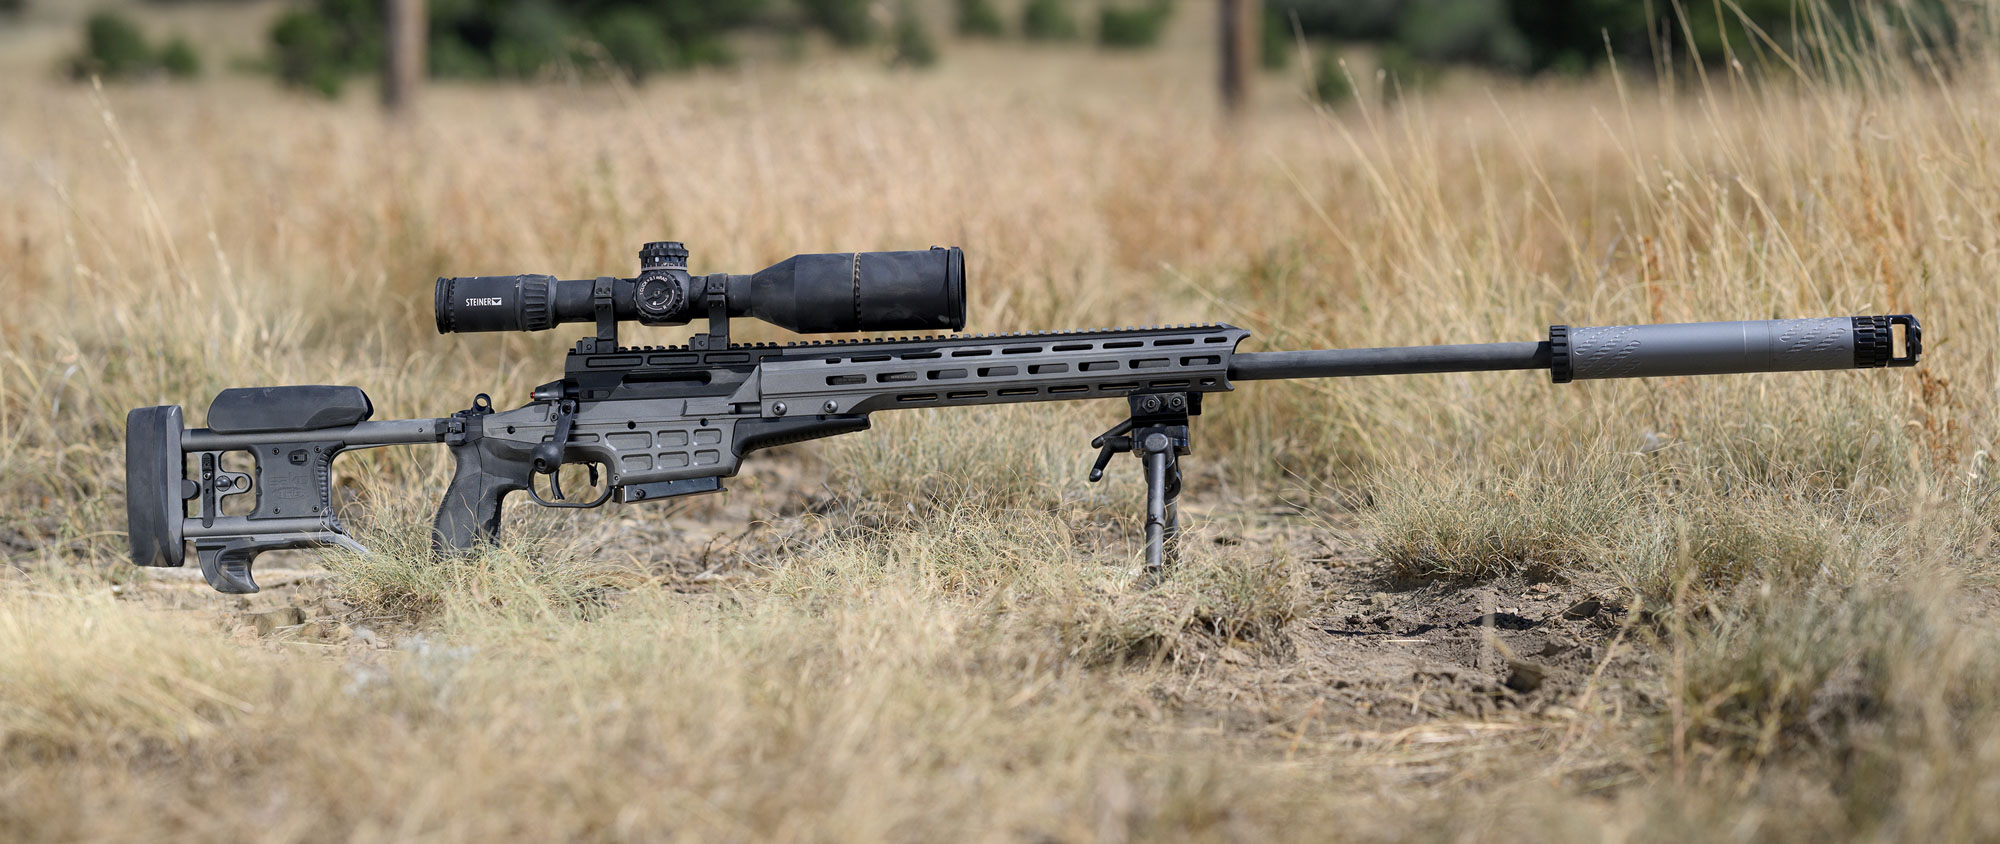 Two Targets, One Bullet: How the Ultimate Sniper Rifle Was Made